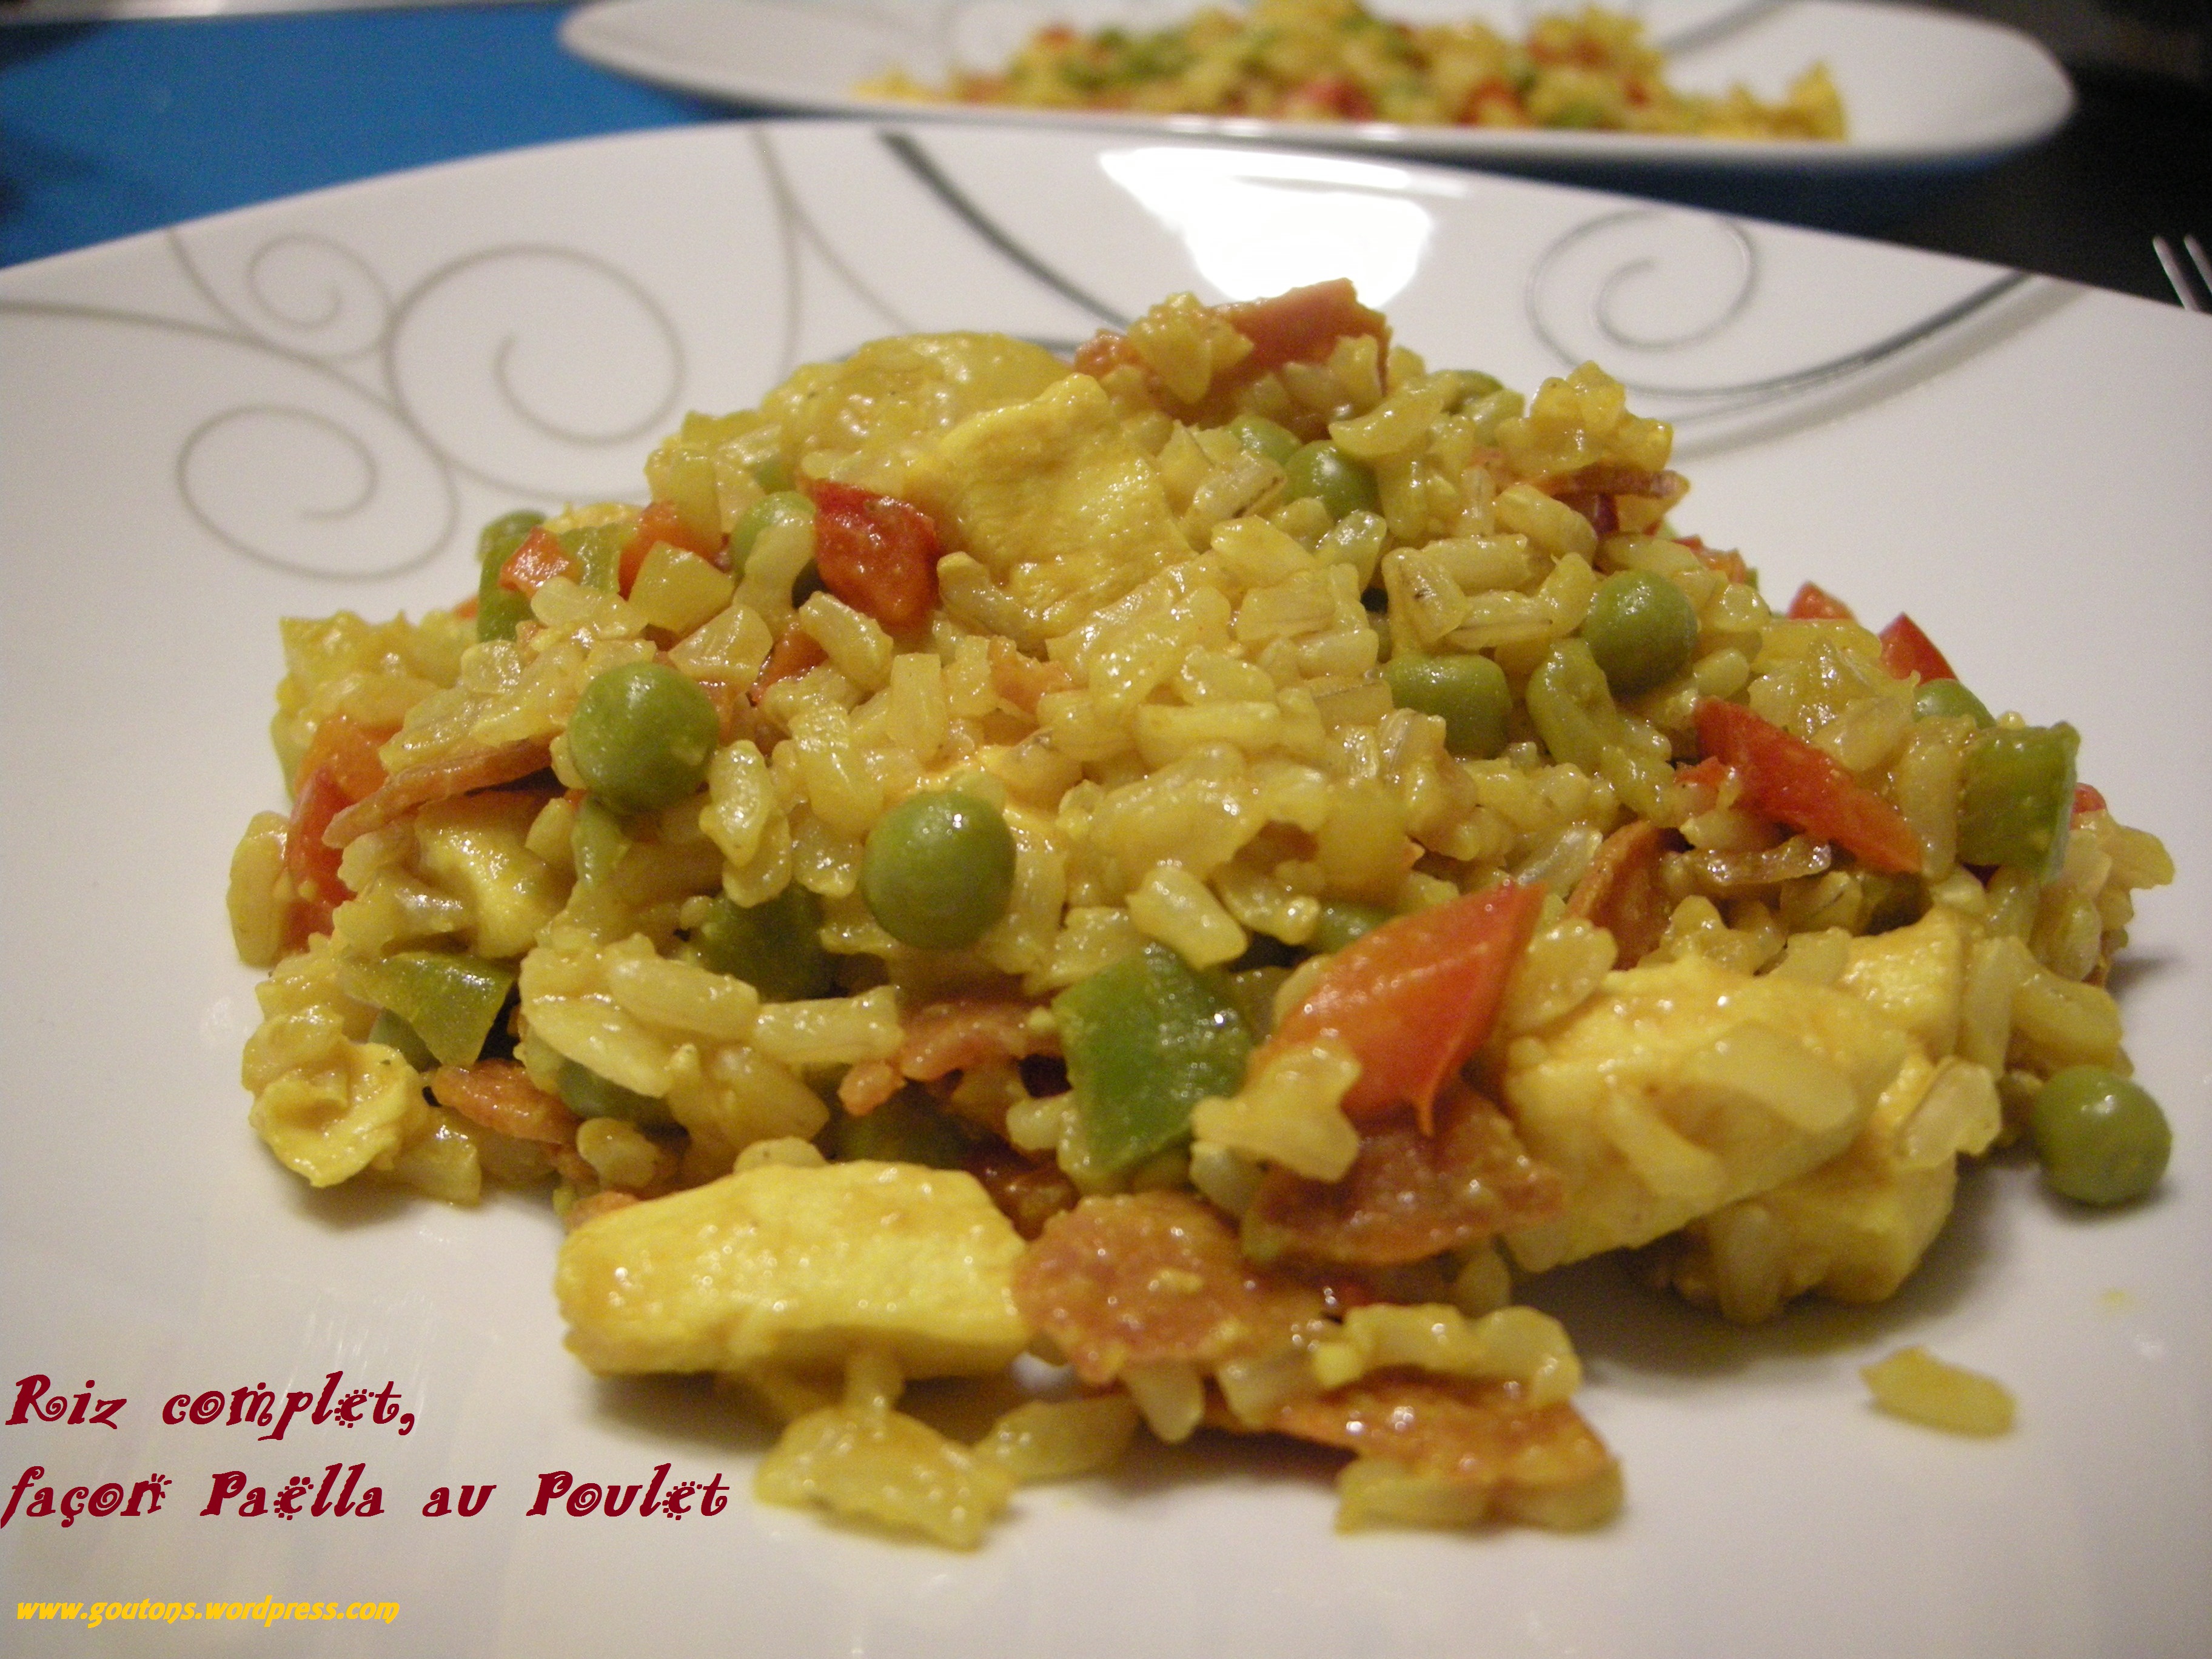 Friendly and Economical, the Paella Express for 6 People!